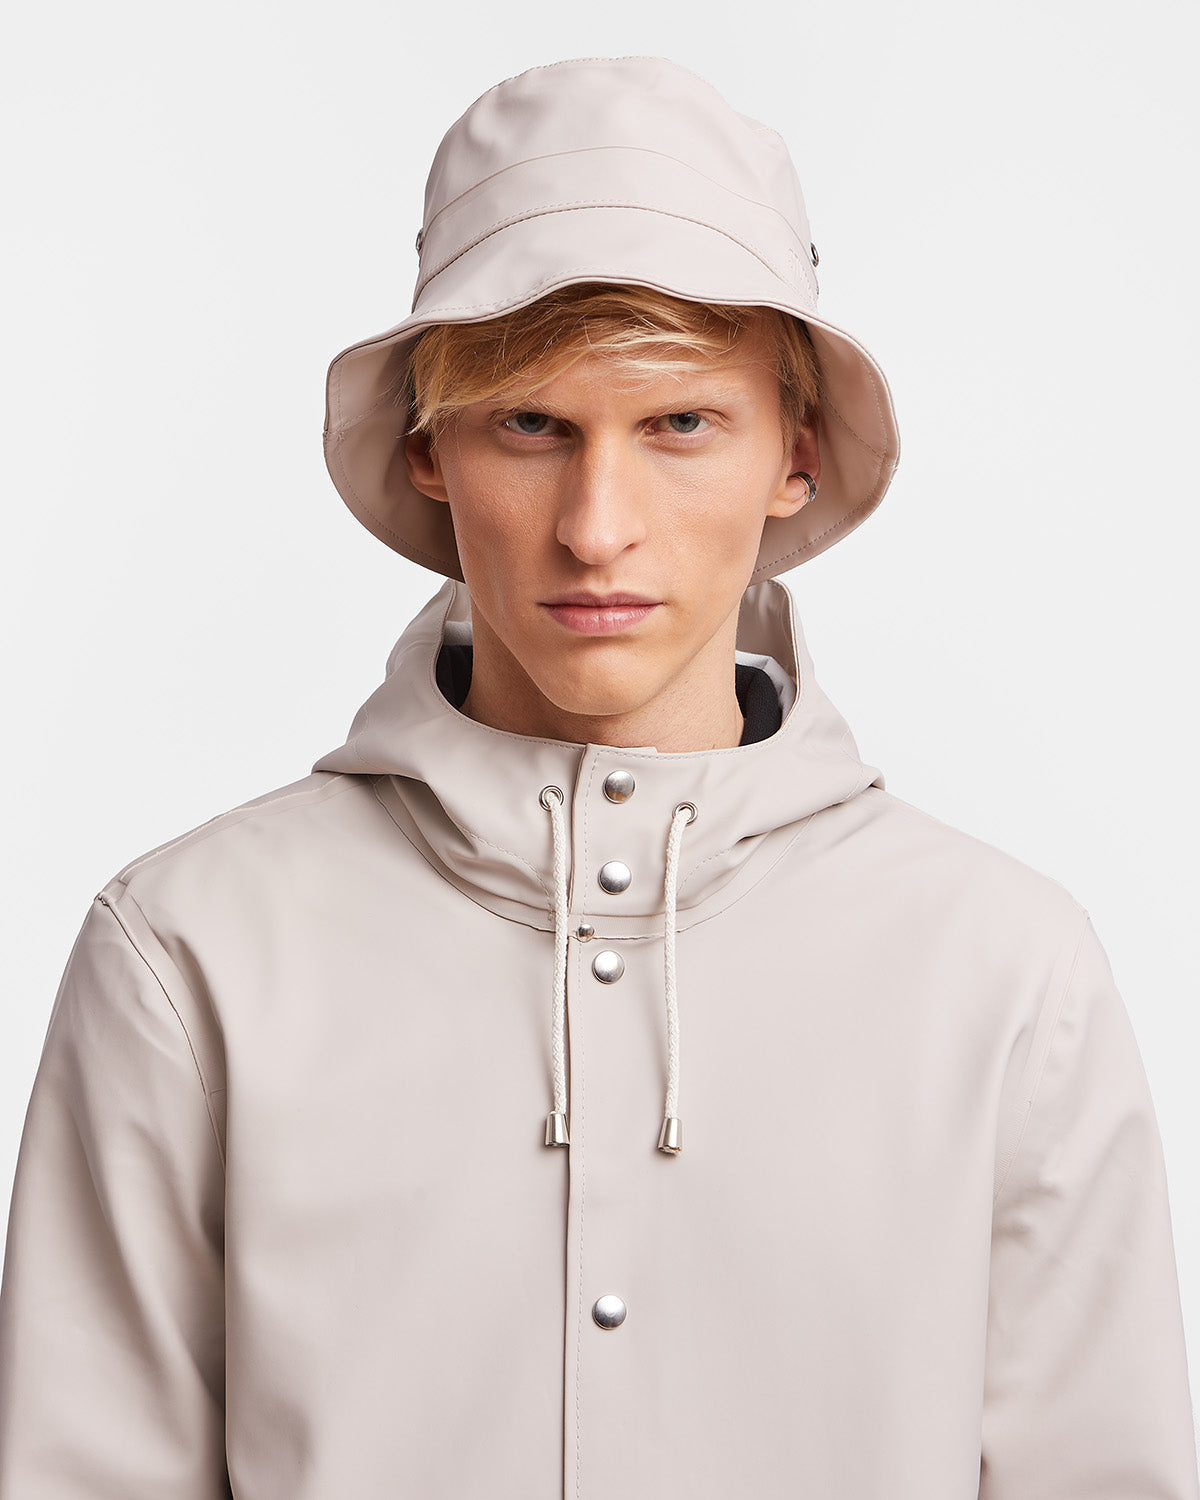 A man with a Bucket Hat in color light sand by Stutterheim